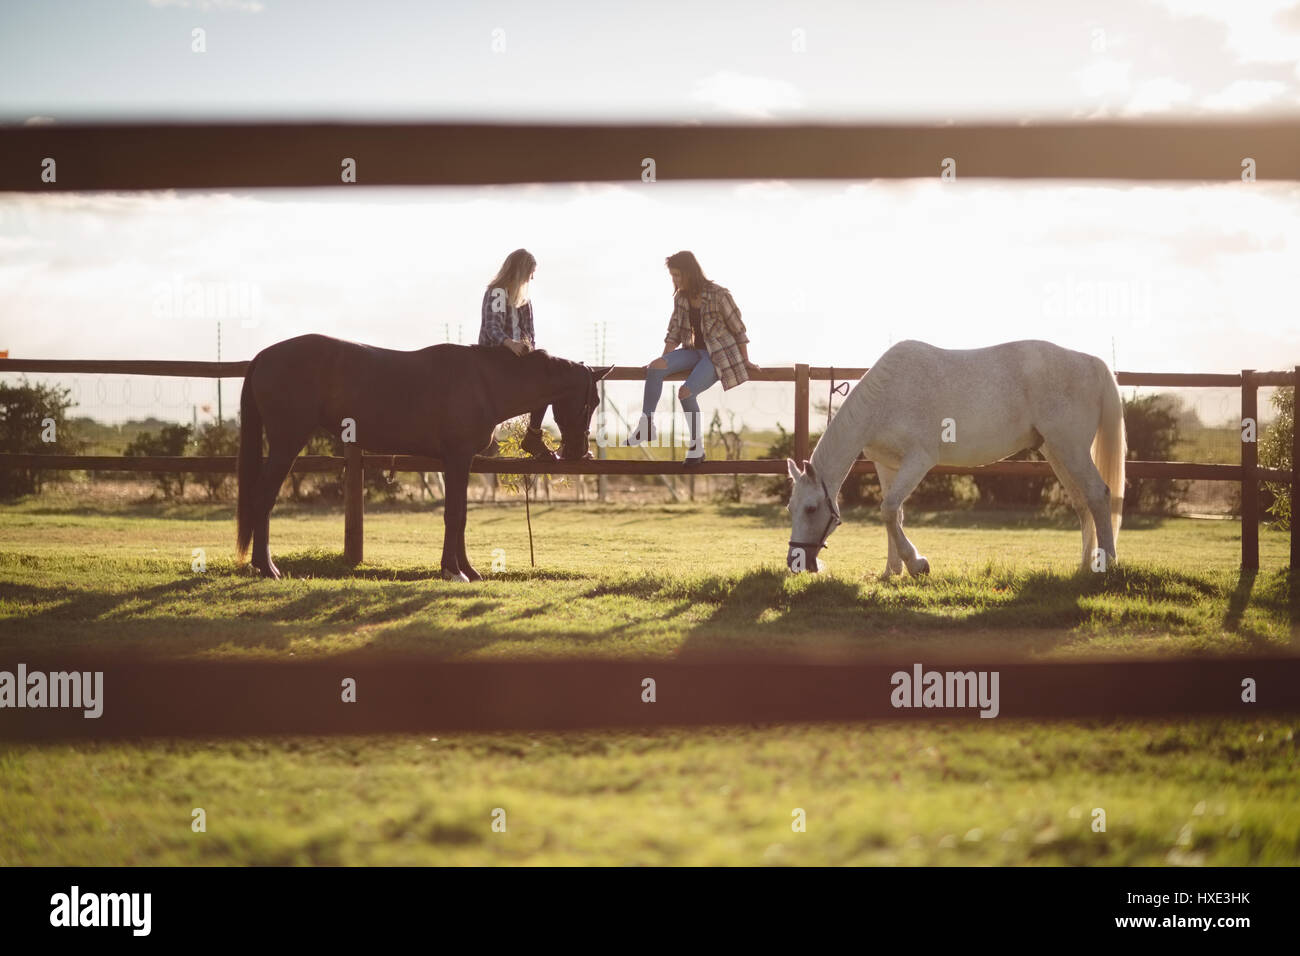 Friends sitting on wooden fence while horse grazing in farm on a sunny day Stock Photo